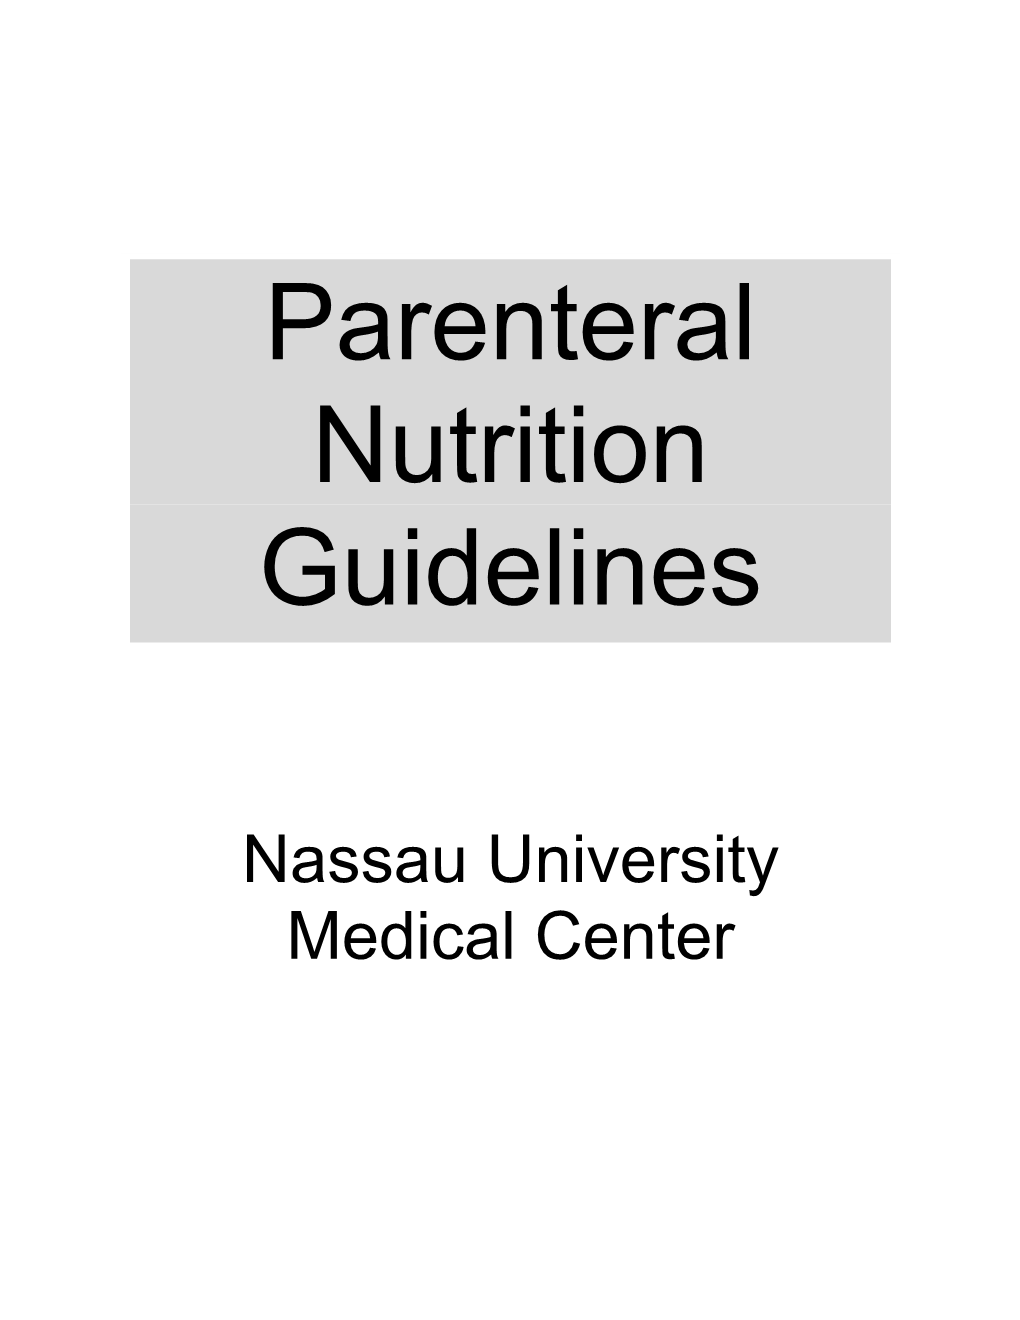 Parenteral Nutrition Guidelines